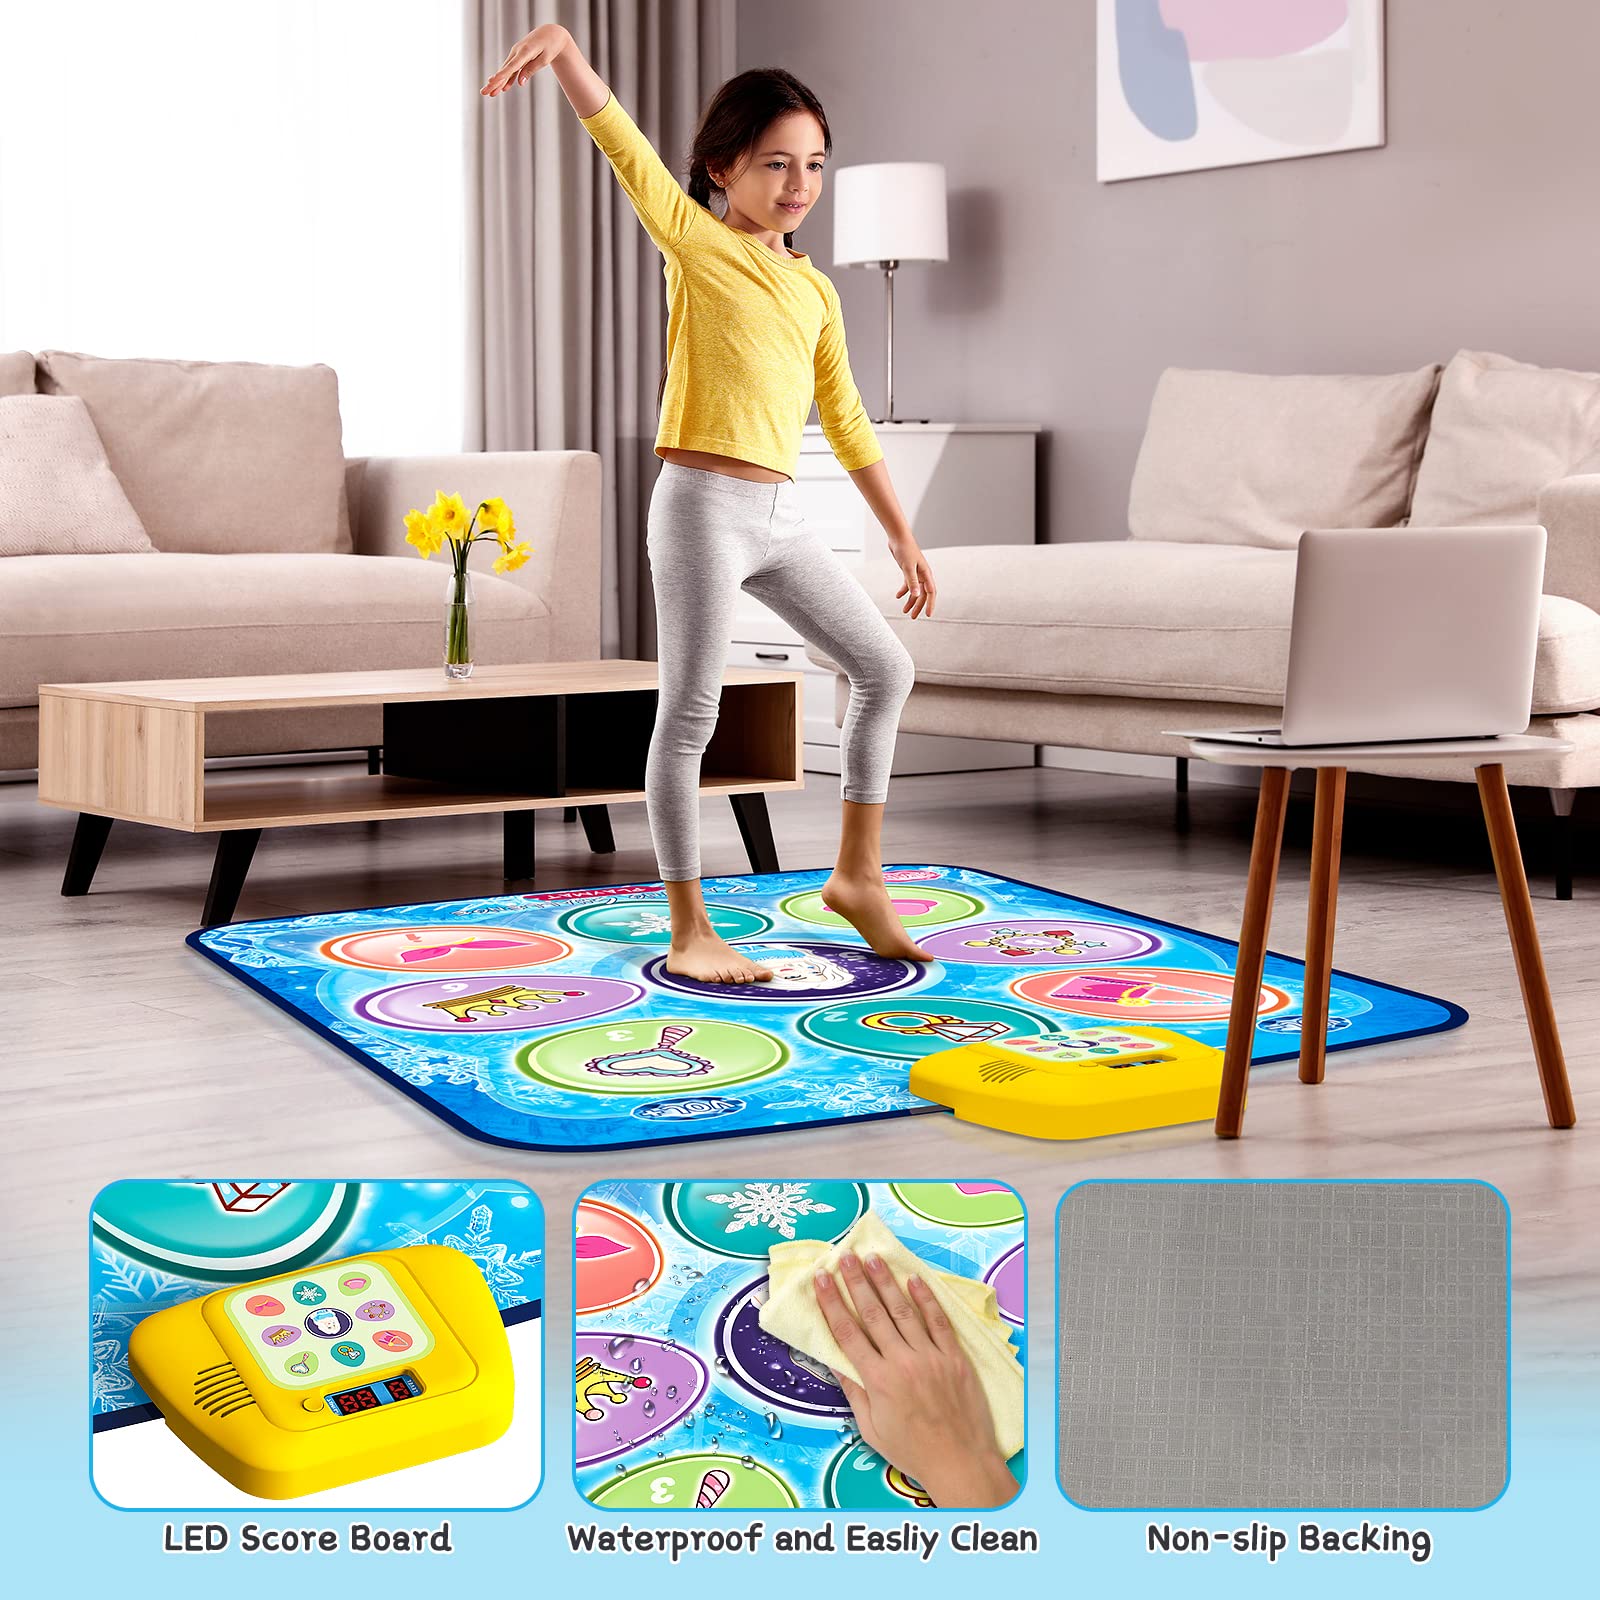 beefunni Dance Mat for Kids - Blue Frozen Themed Musical Dance Pad, Dance Game Toys with LED Lights, Including 5 Modes and 3 Challenge Levels, Birthday Gifts for Girls Boys Age 3 4 5 6 7 8-12